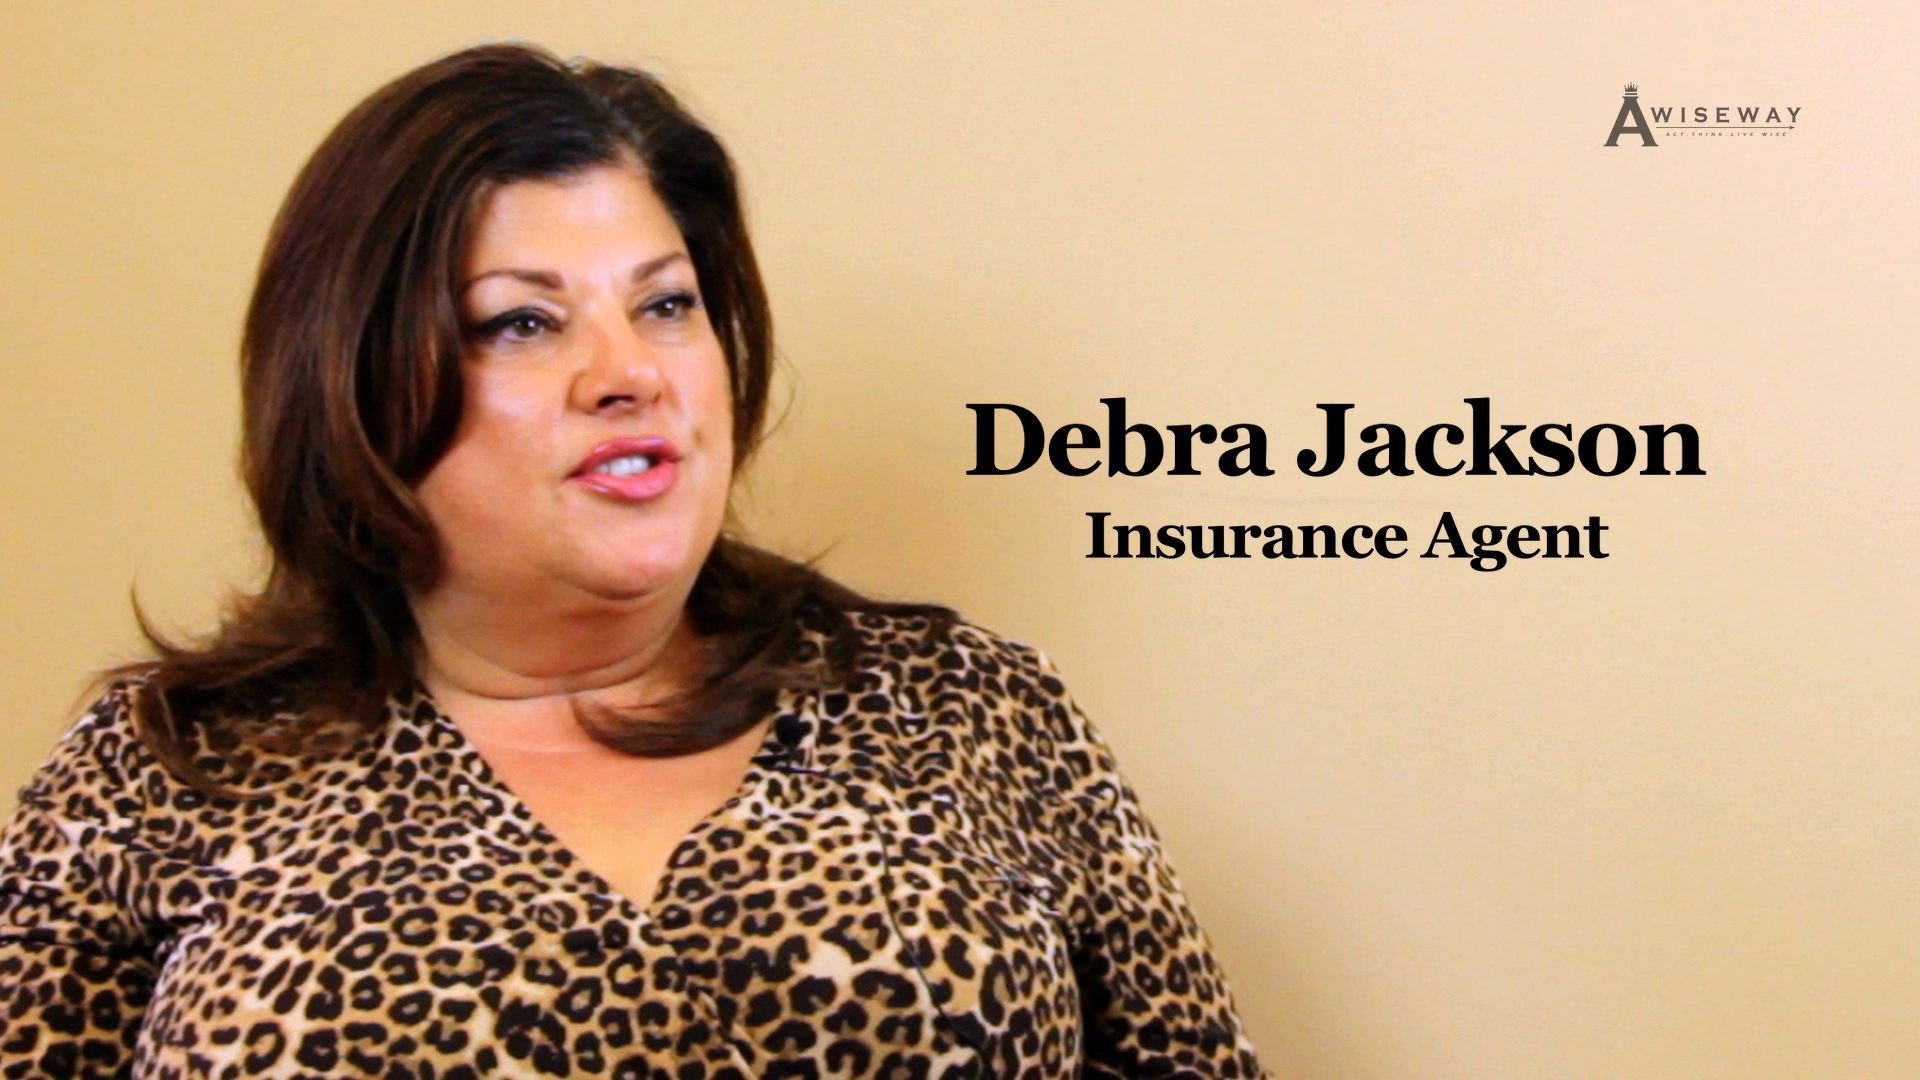 What should I expect in becoming an insurance agent?